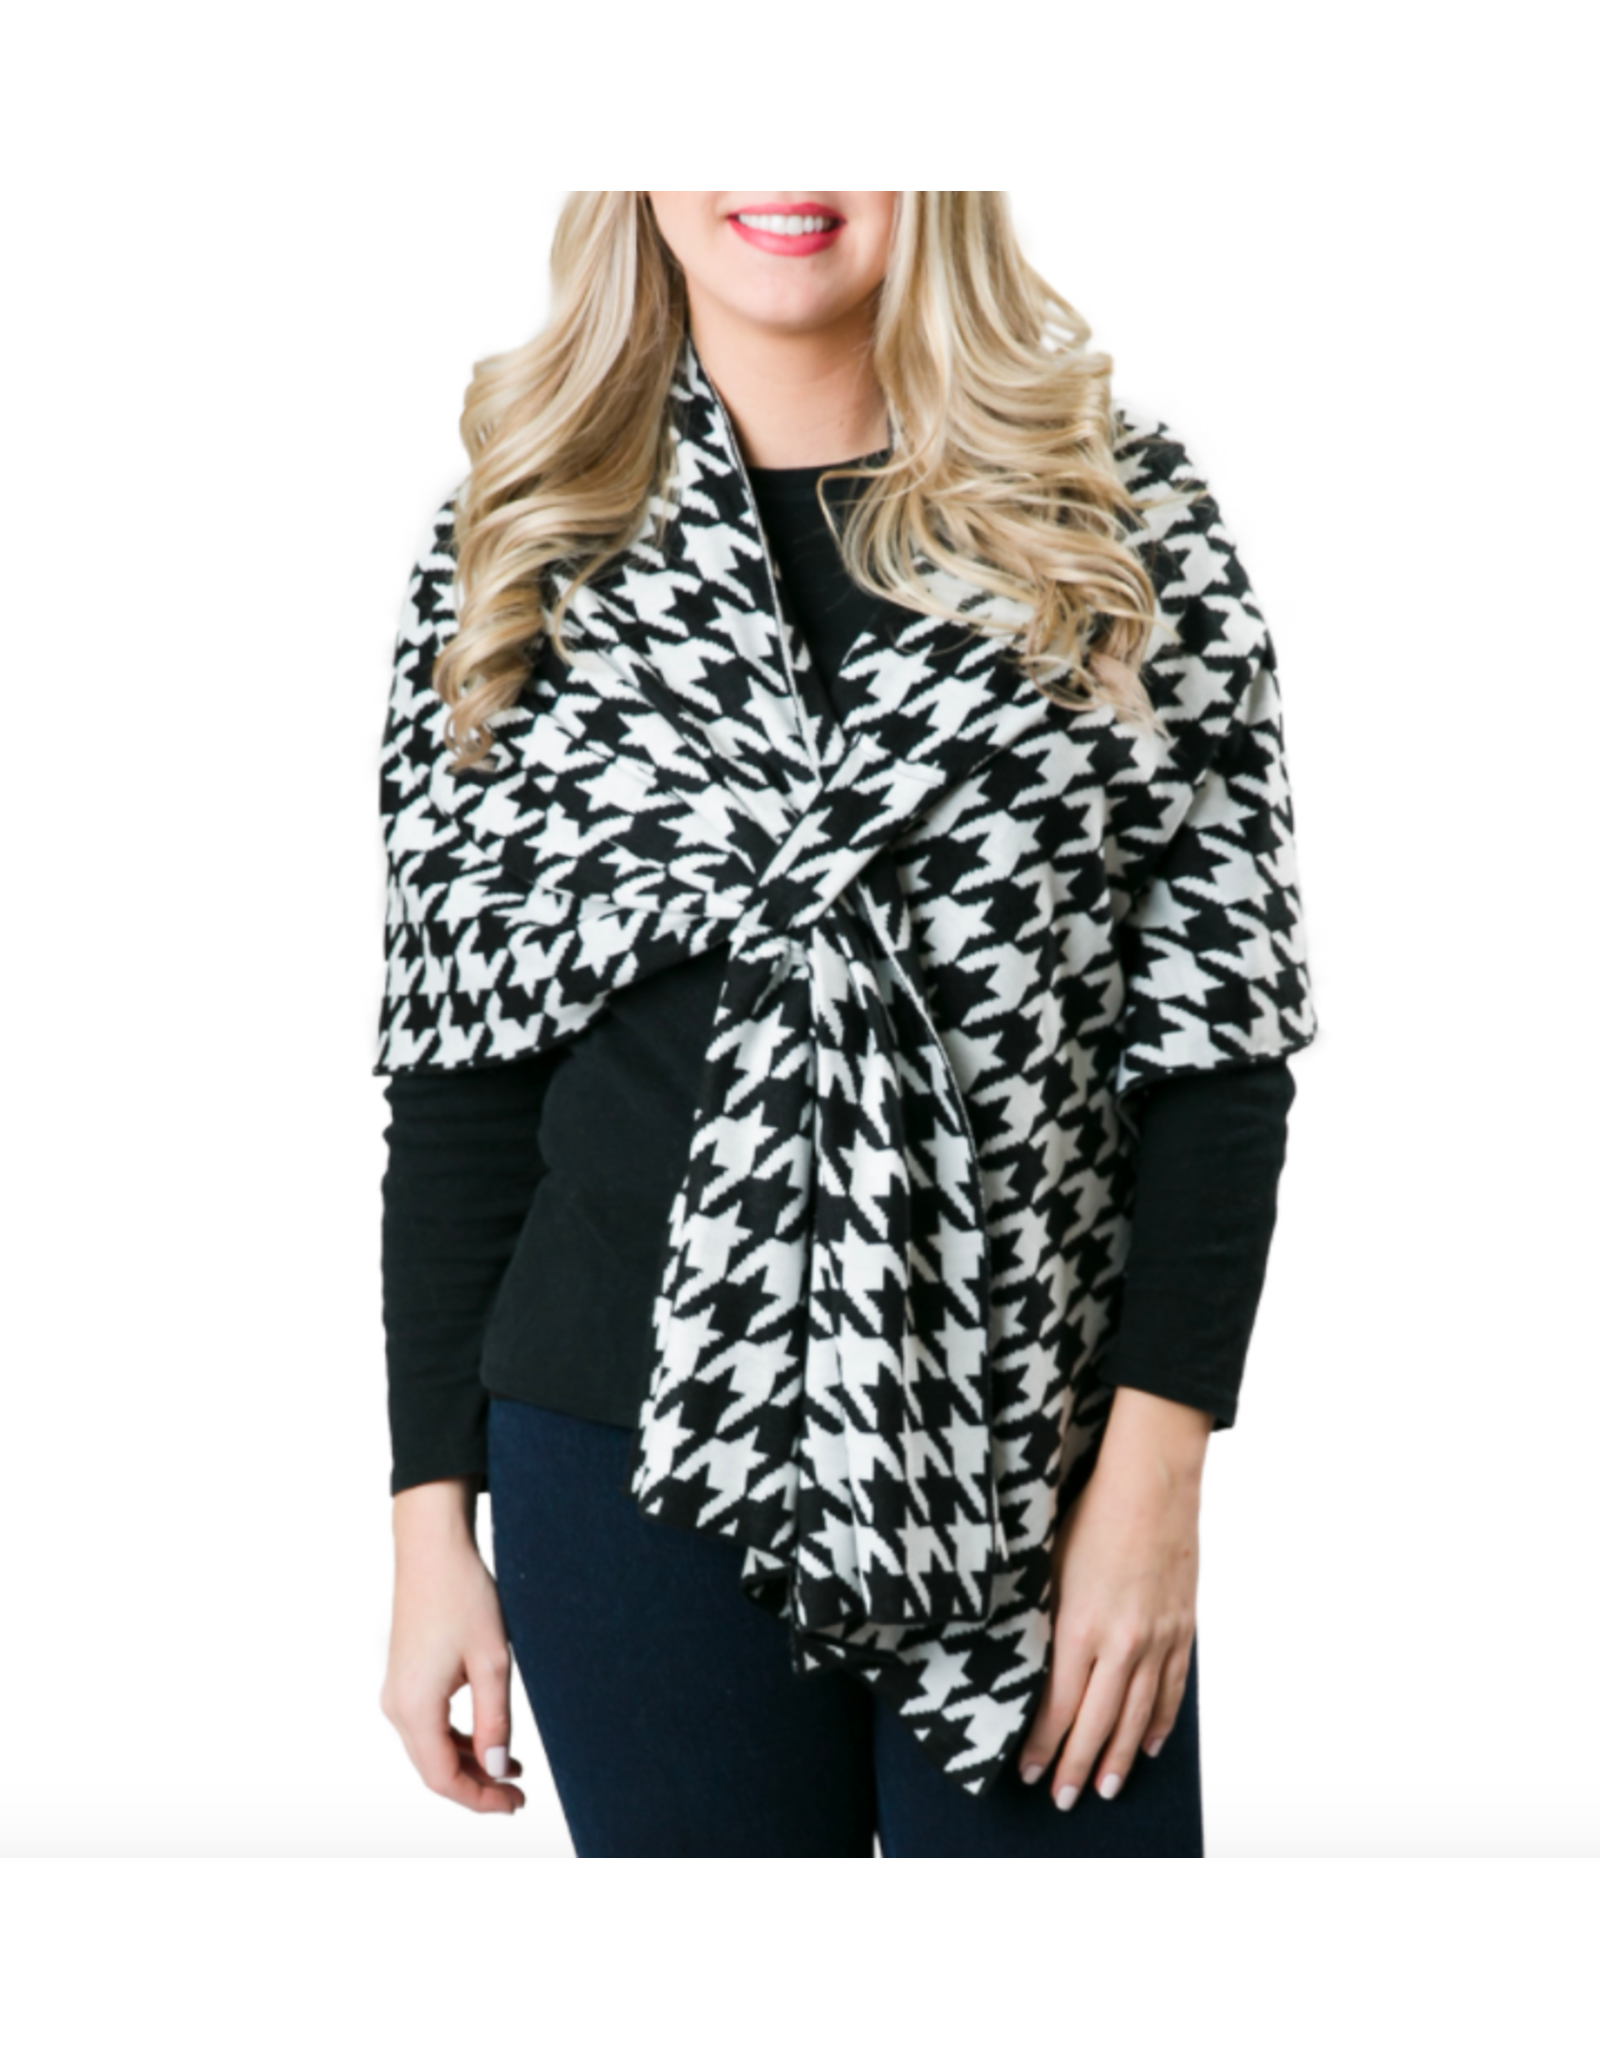 Accessories Shop at Junebug Katie Wrap in Black and White Houndstooth